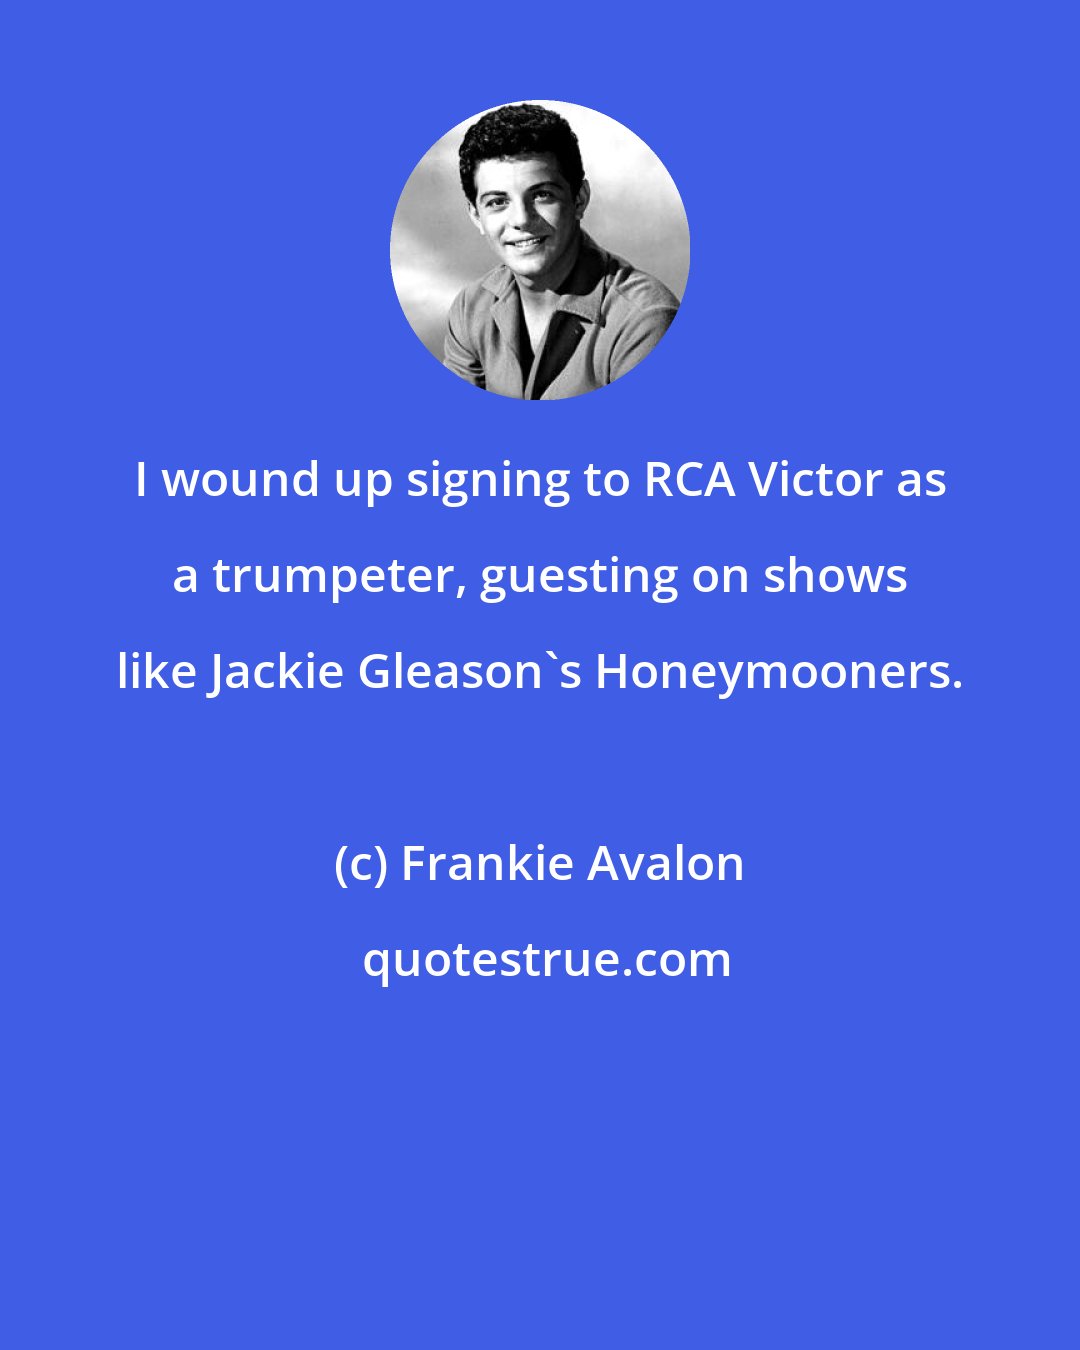 Frankie Avalon: I wound up signing to RCA Victor as a trumpeter, guesting on shows like Jackie Gleason's Honeymooners.